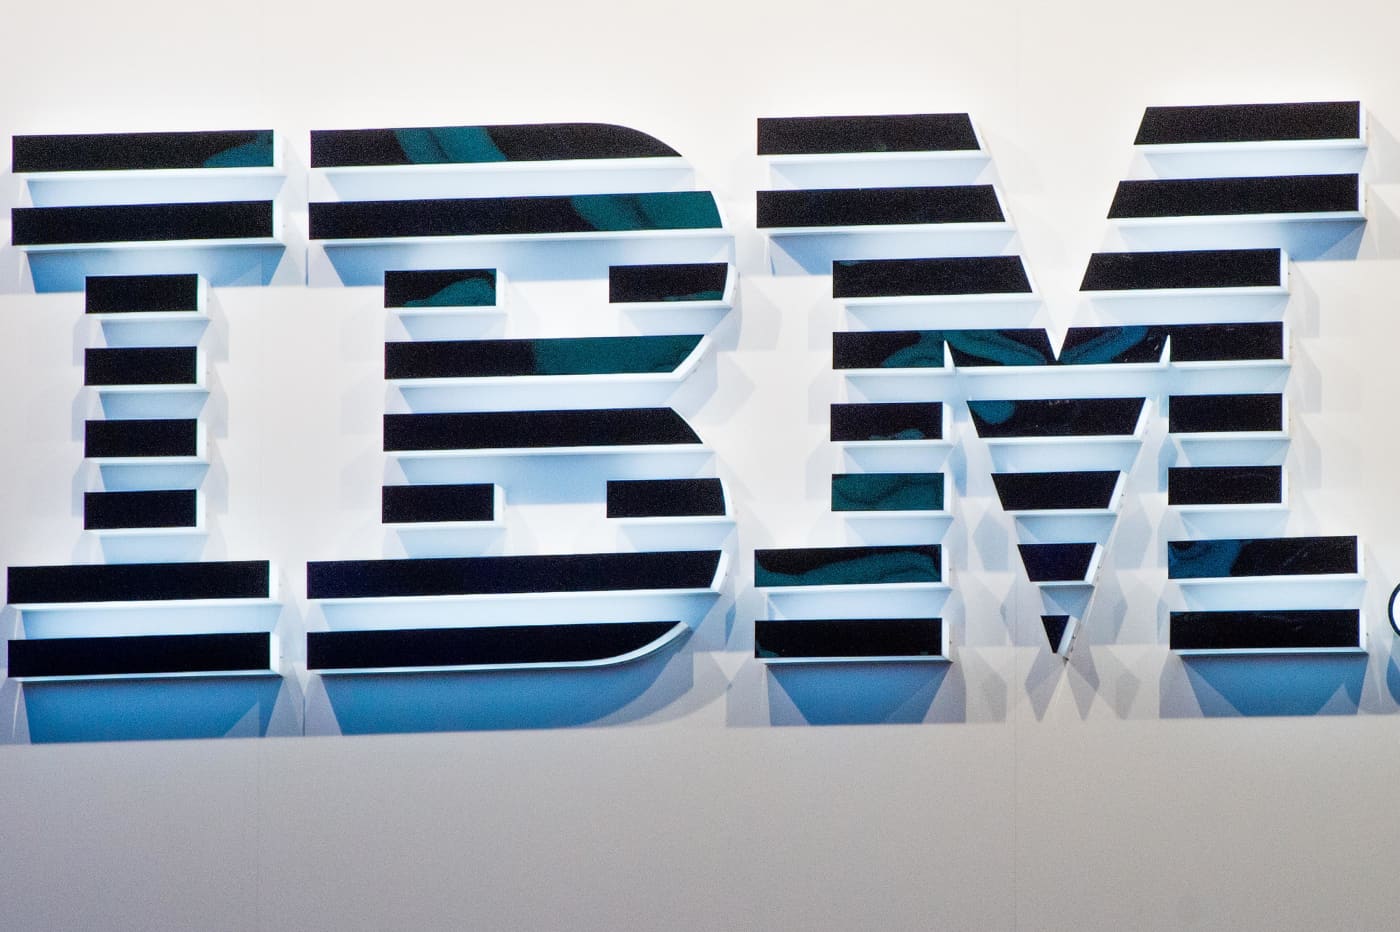 #IBM stock slips after another revenue decline, no outlook